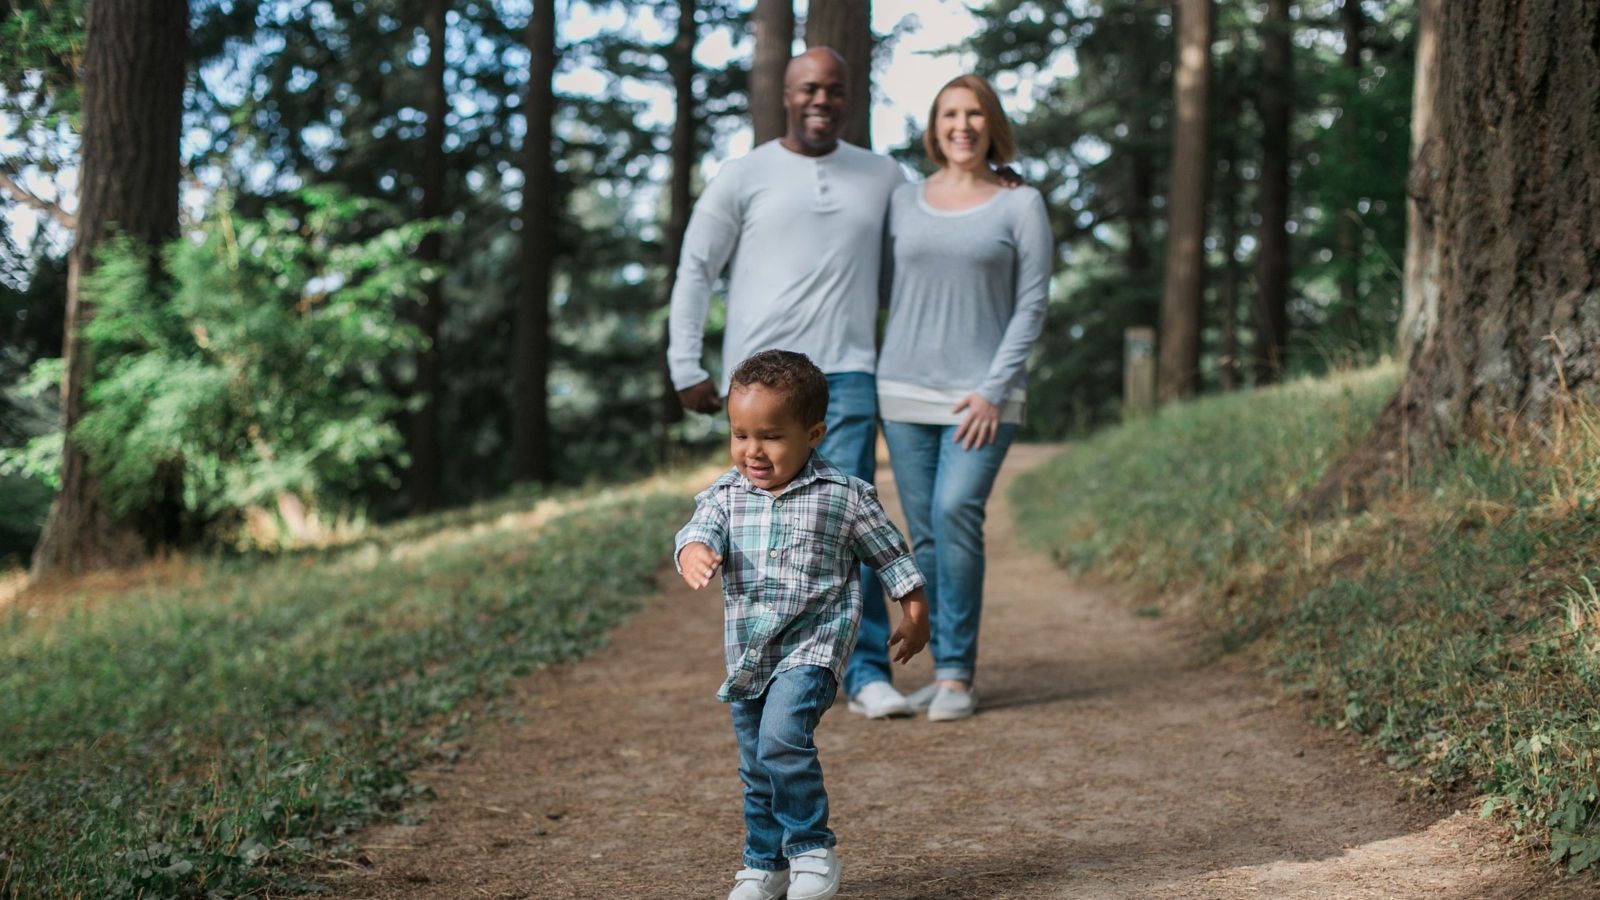 dark skinned baby running ahead in forest, with dark skinned dad and white mum